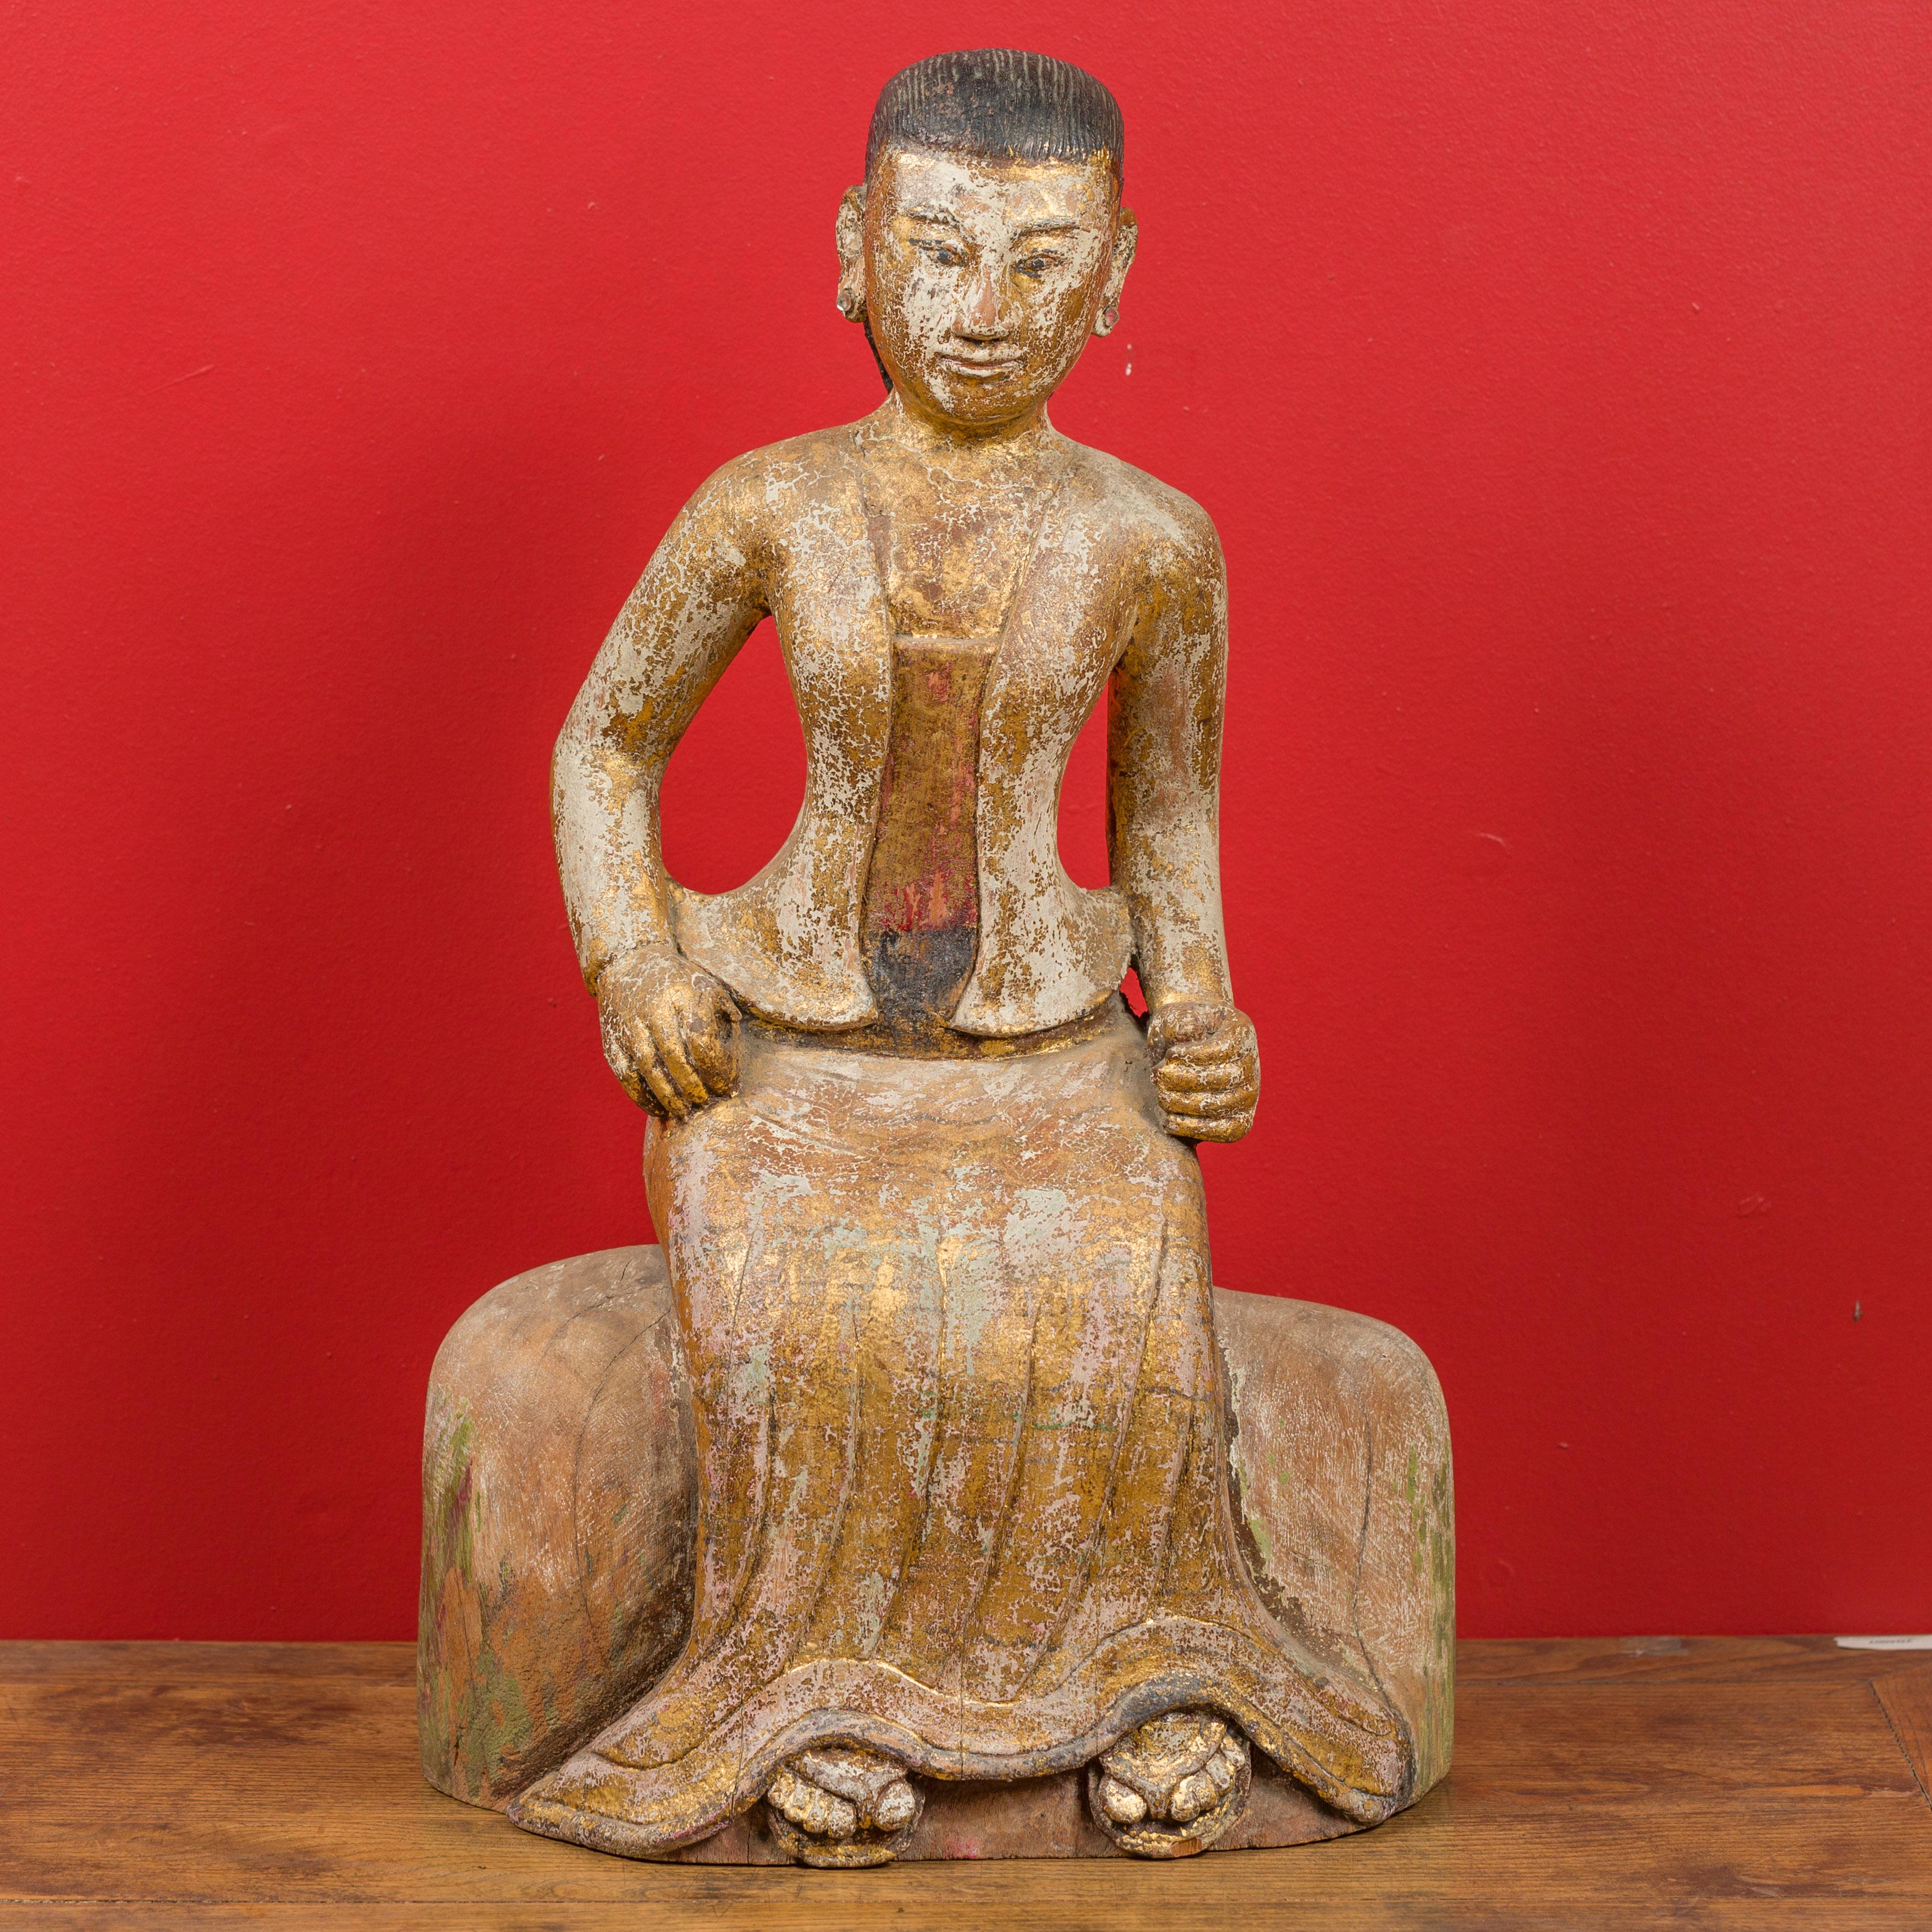 A Burmese hand carved and gilded seated woman statue from the 19th century, in traditional costume. Created in Burma during the 19th century, this sculpture depicts a woman wearing a gilded traditional Burmese costume with sandals, and showcases